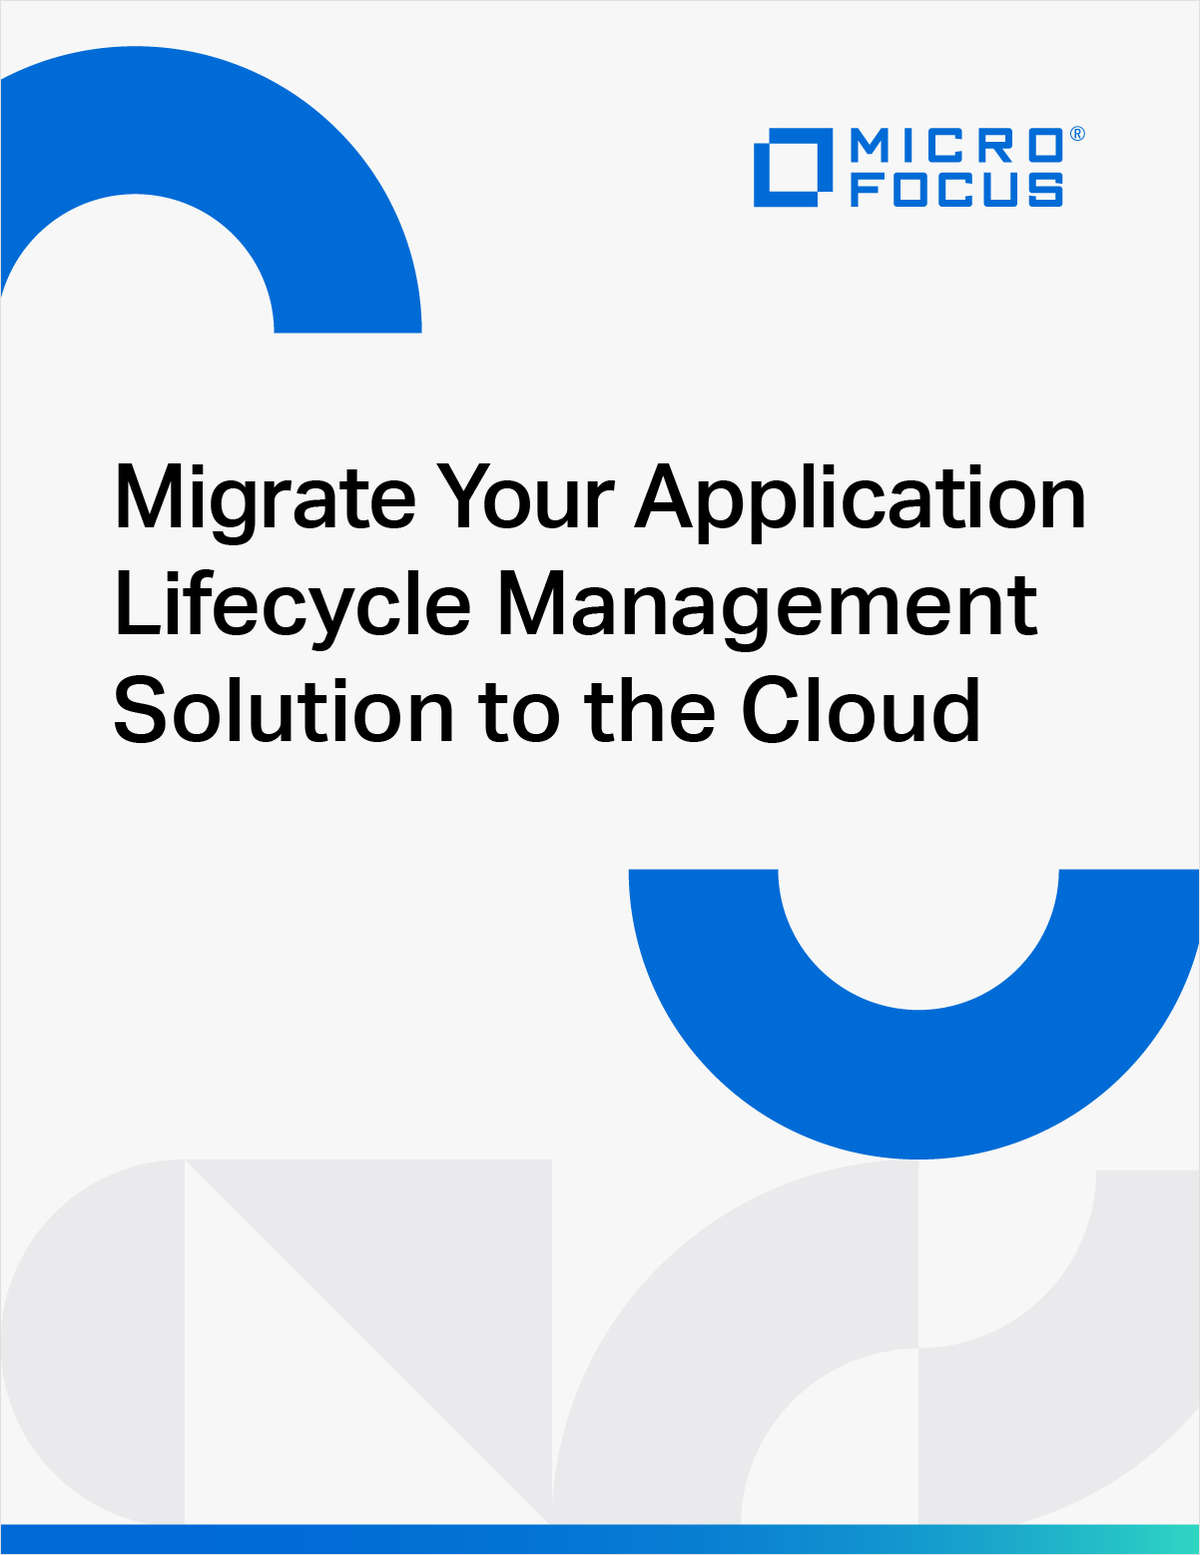 Migrate Your Application Lifecycle Management Solution to the Cloud